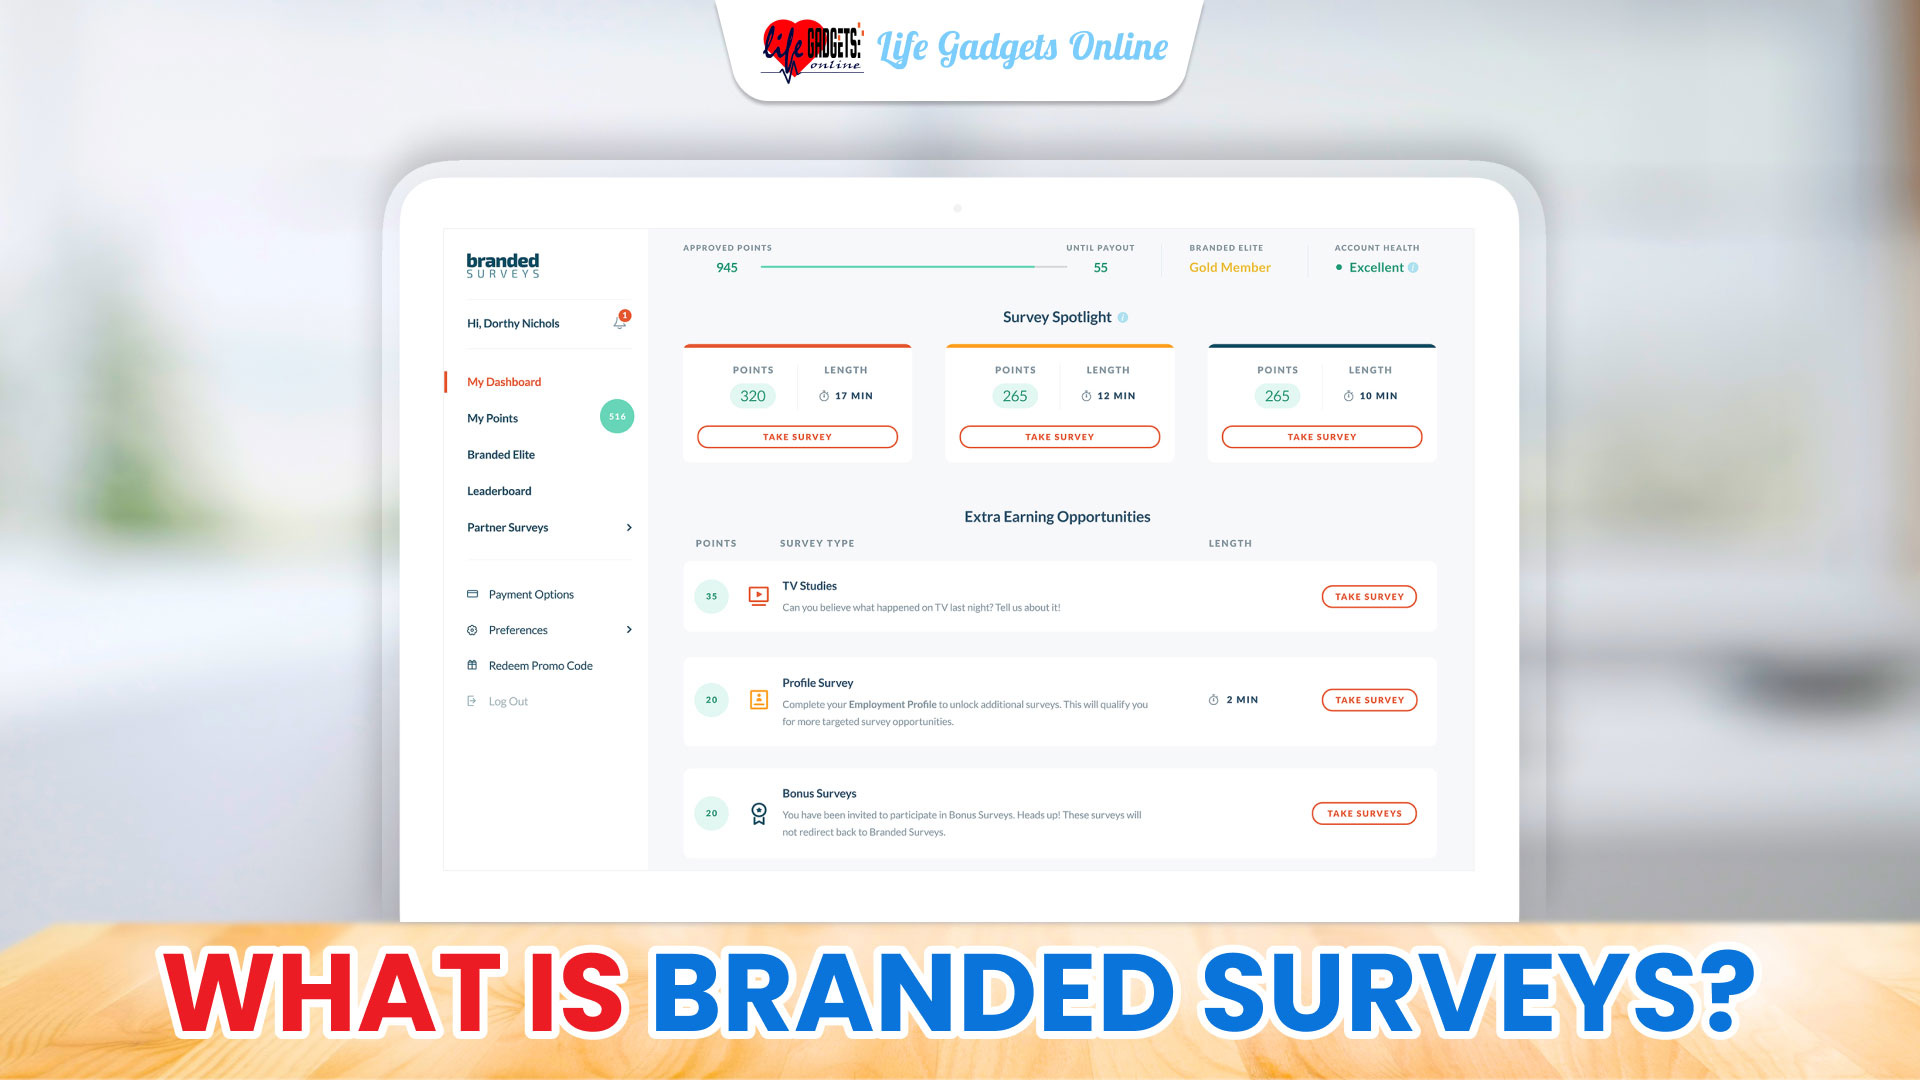 What is Branded Surveys?